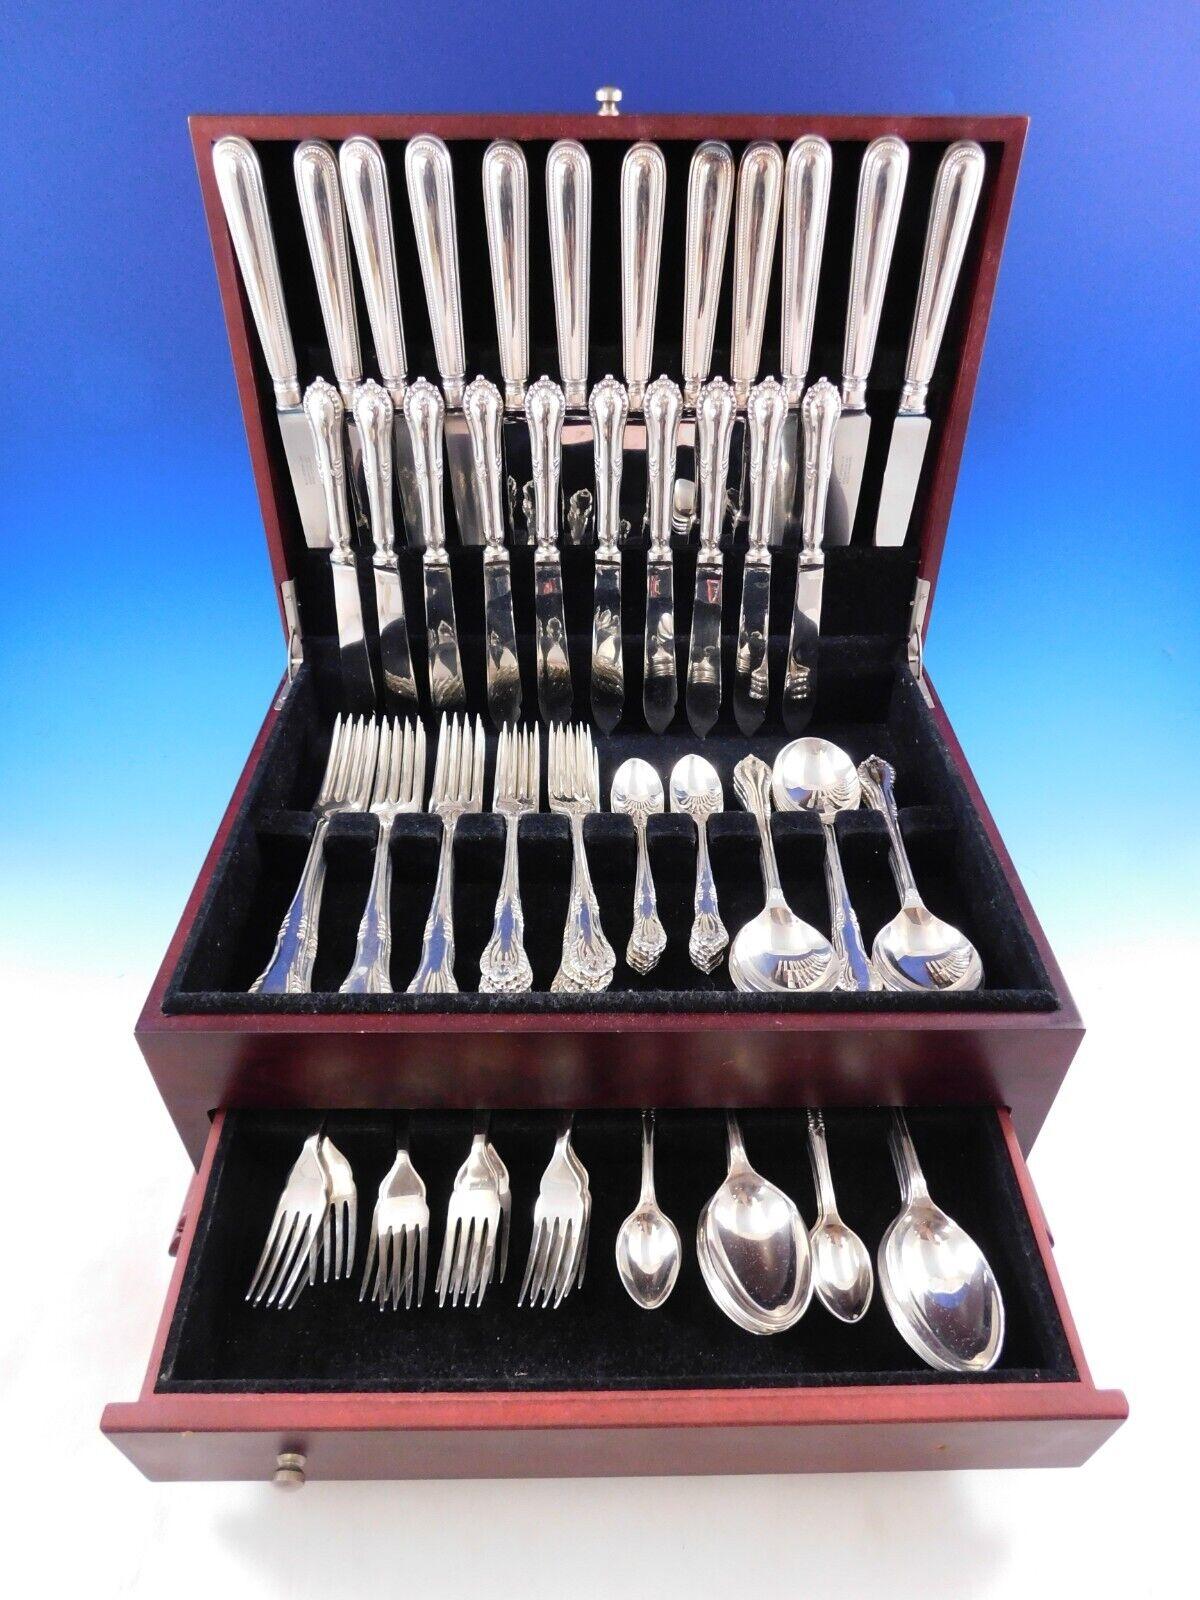 Superb Russell by Garrard, Sheffield 1976 sterling silver Flatware set, 104 pieces. This set includes:

12 Extra Large Dinner Size Knives, 10 1/4